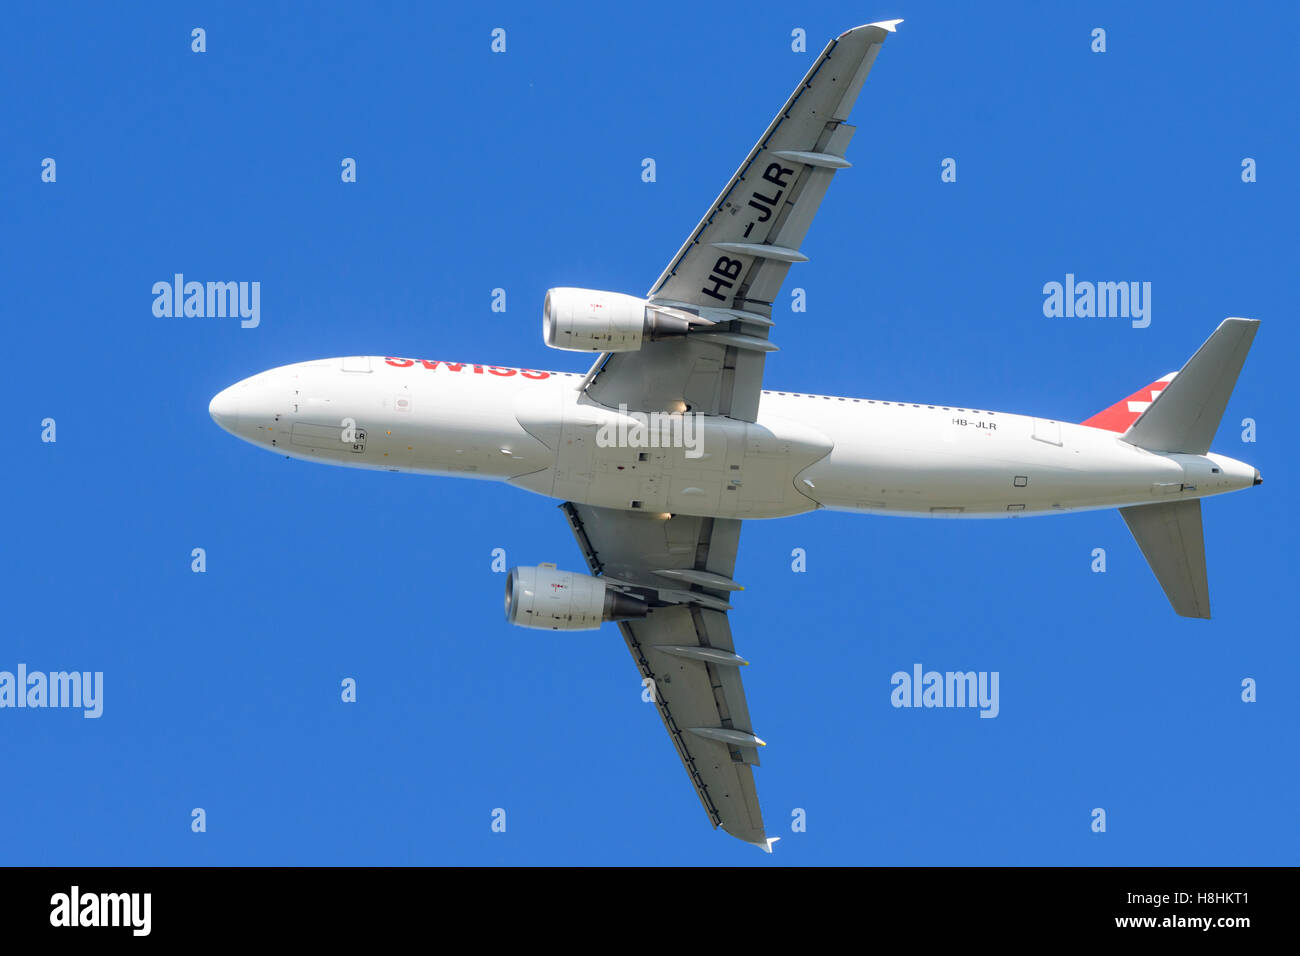 Maribor, Slovenia - August 24 2016: Swiss International Airlines crew is training in Maribor with an Airbus A-320 executing traf Stock Photo